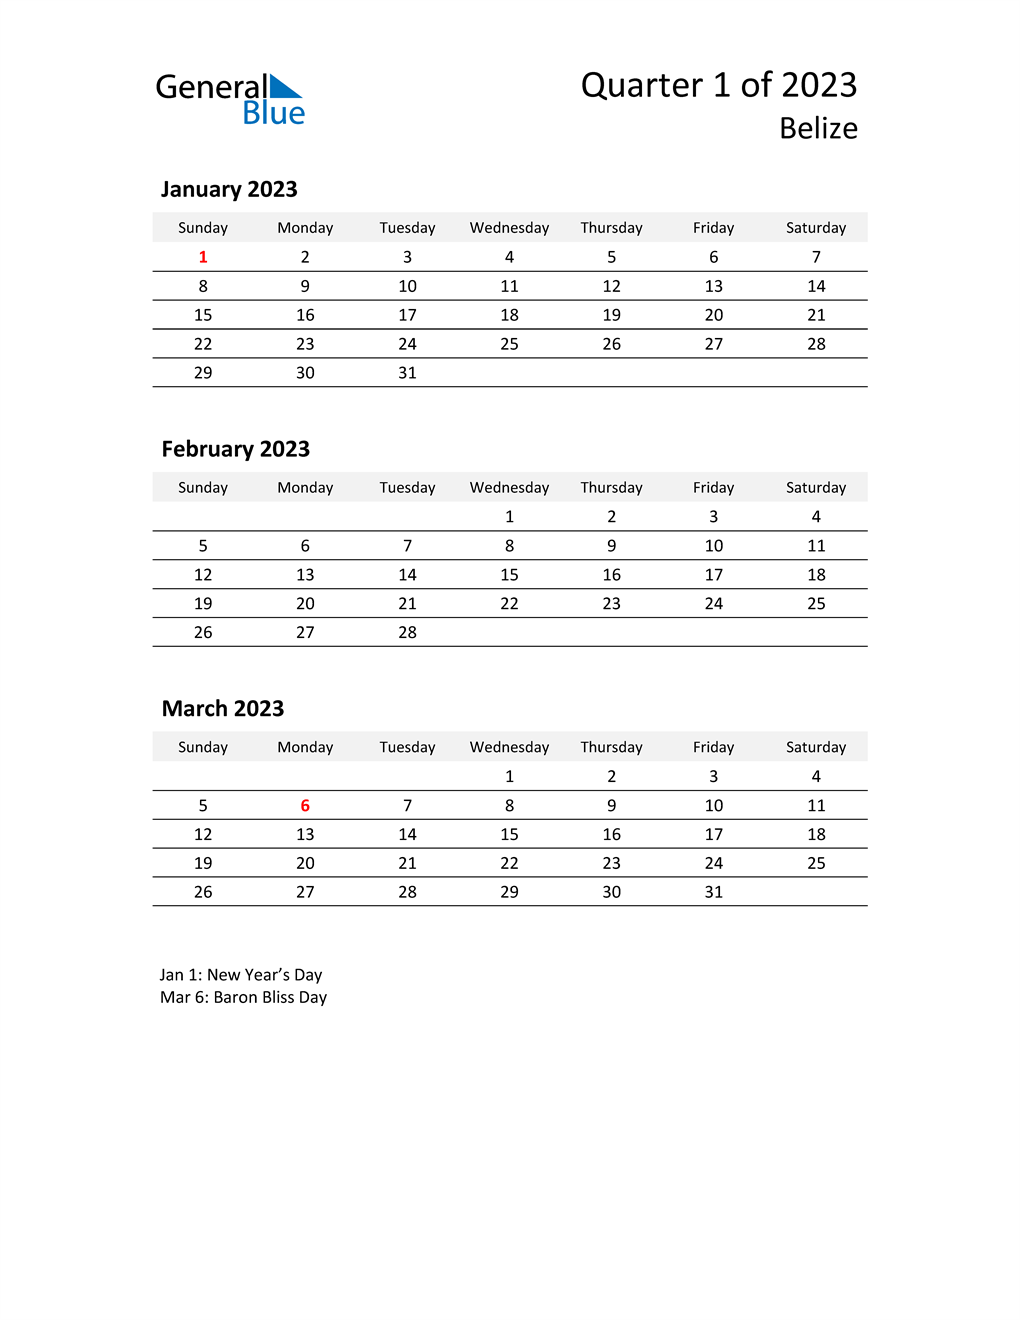  2023 Three-Month Calendar for Belize